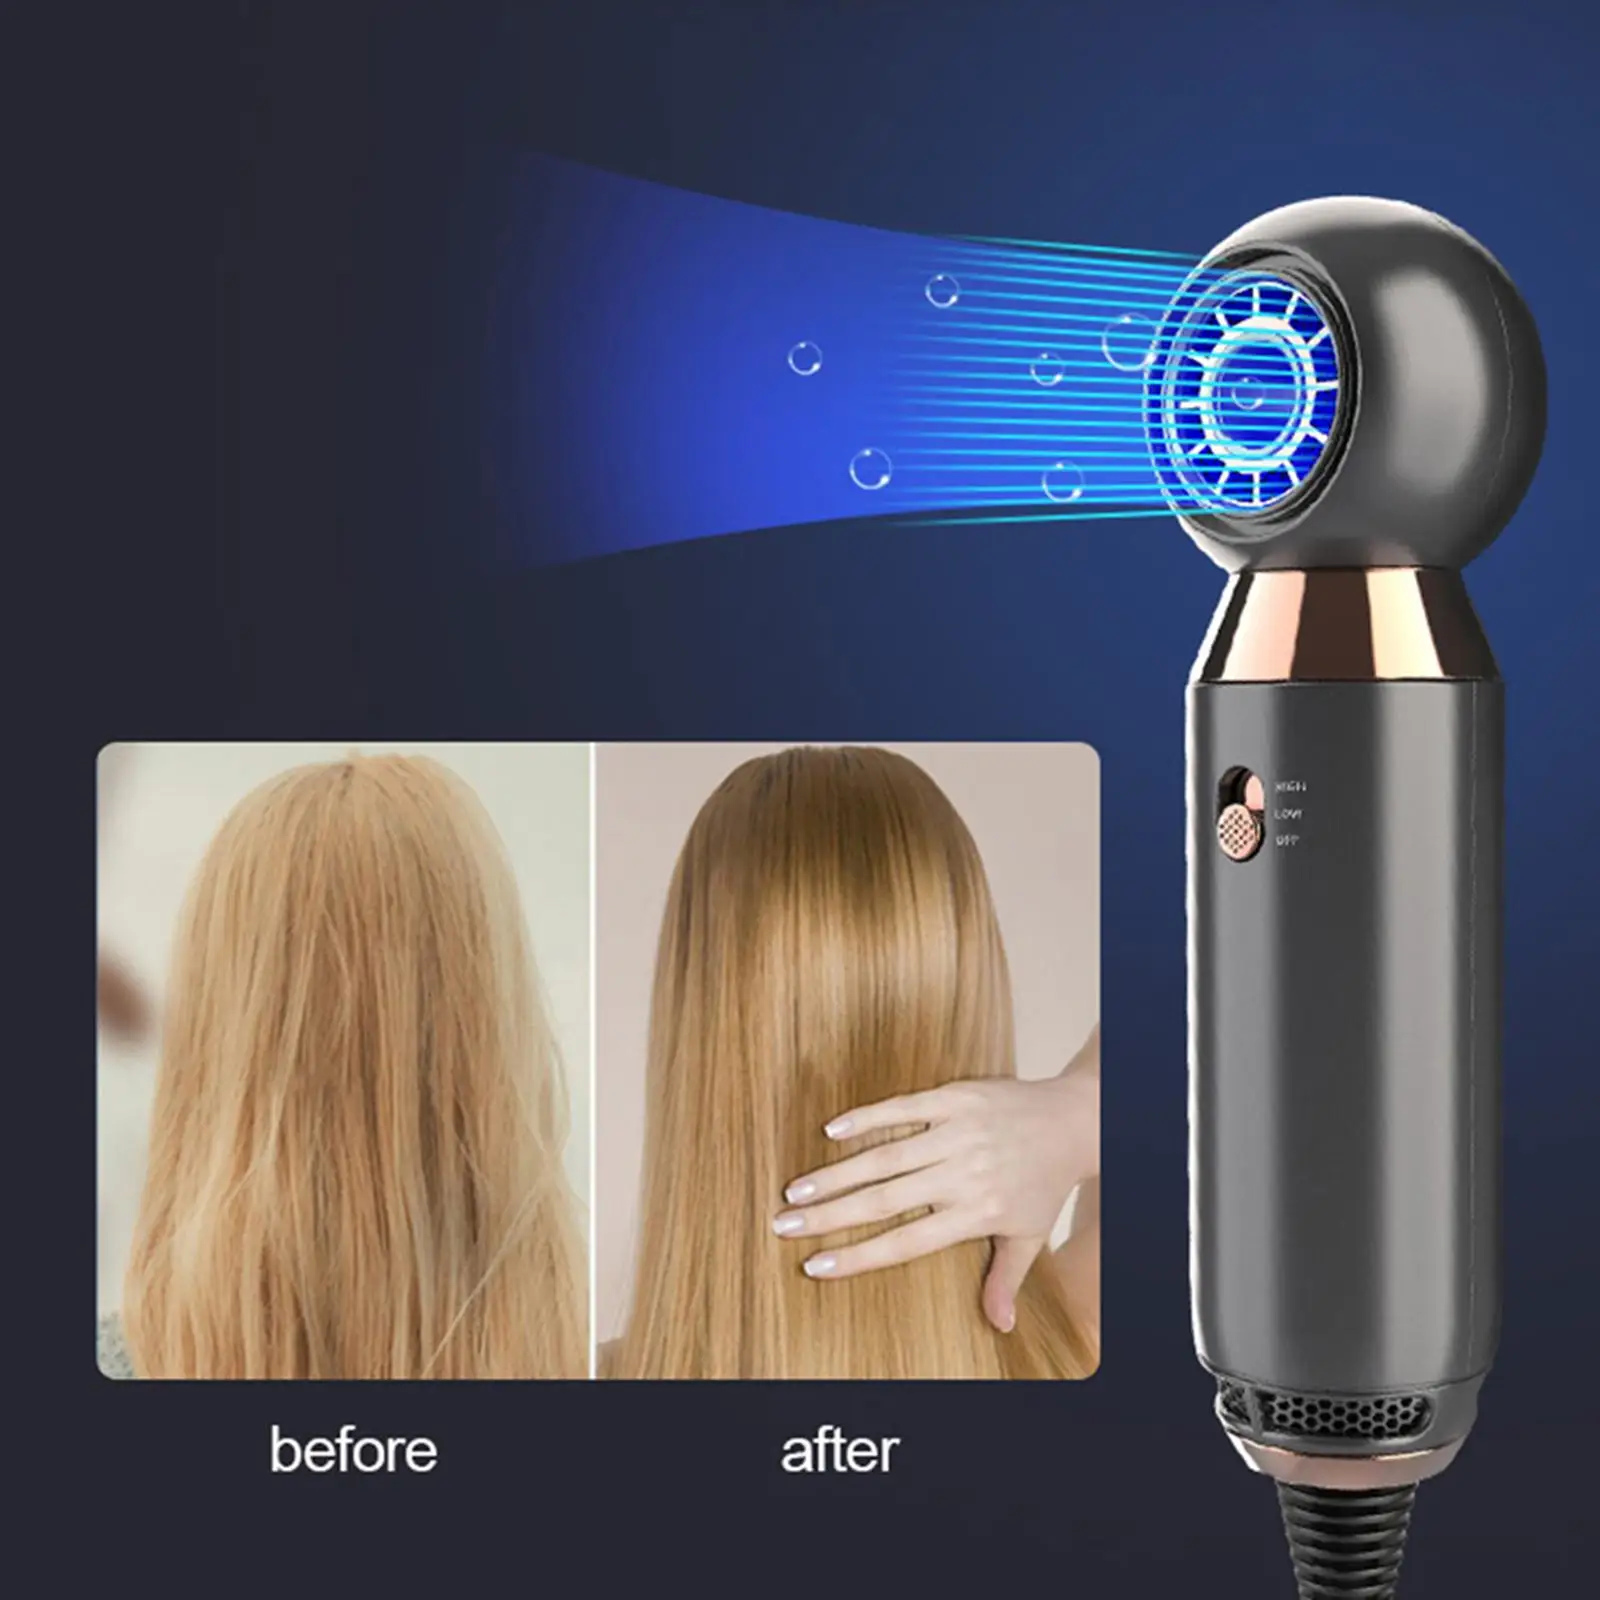 Electric Hair Dryer 800W Hot Cold Quick Dry Hot/Cold Air Hairdryer Blow Dryer for Hair Care Personal Care Dormitory Salon Hotel